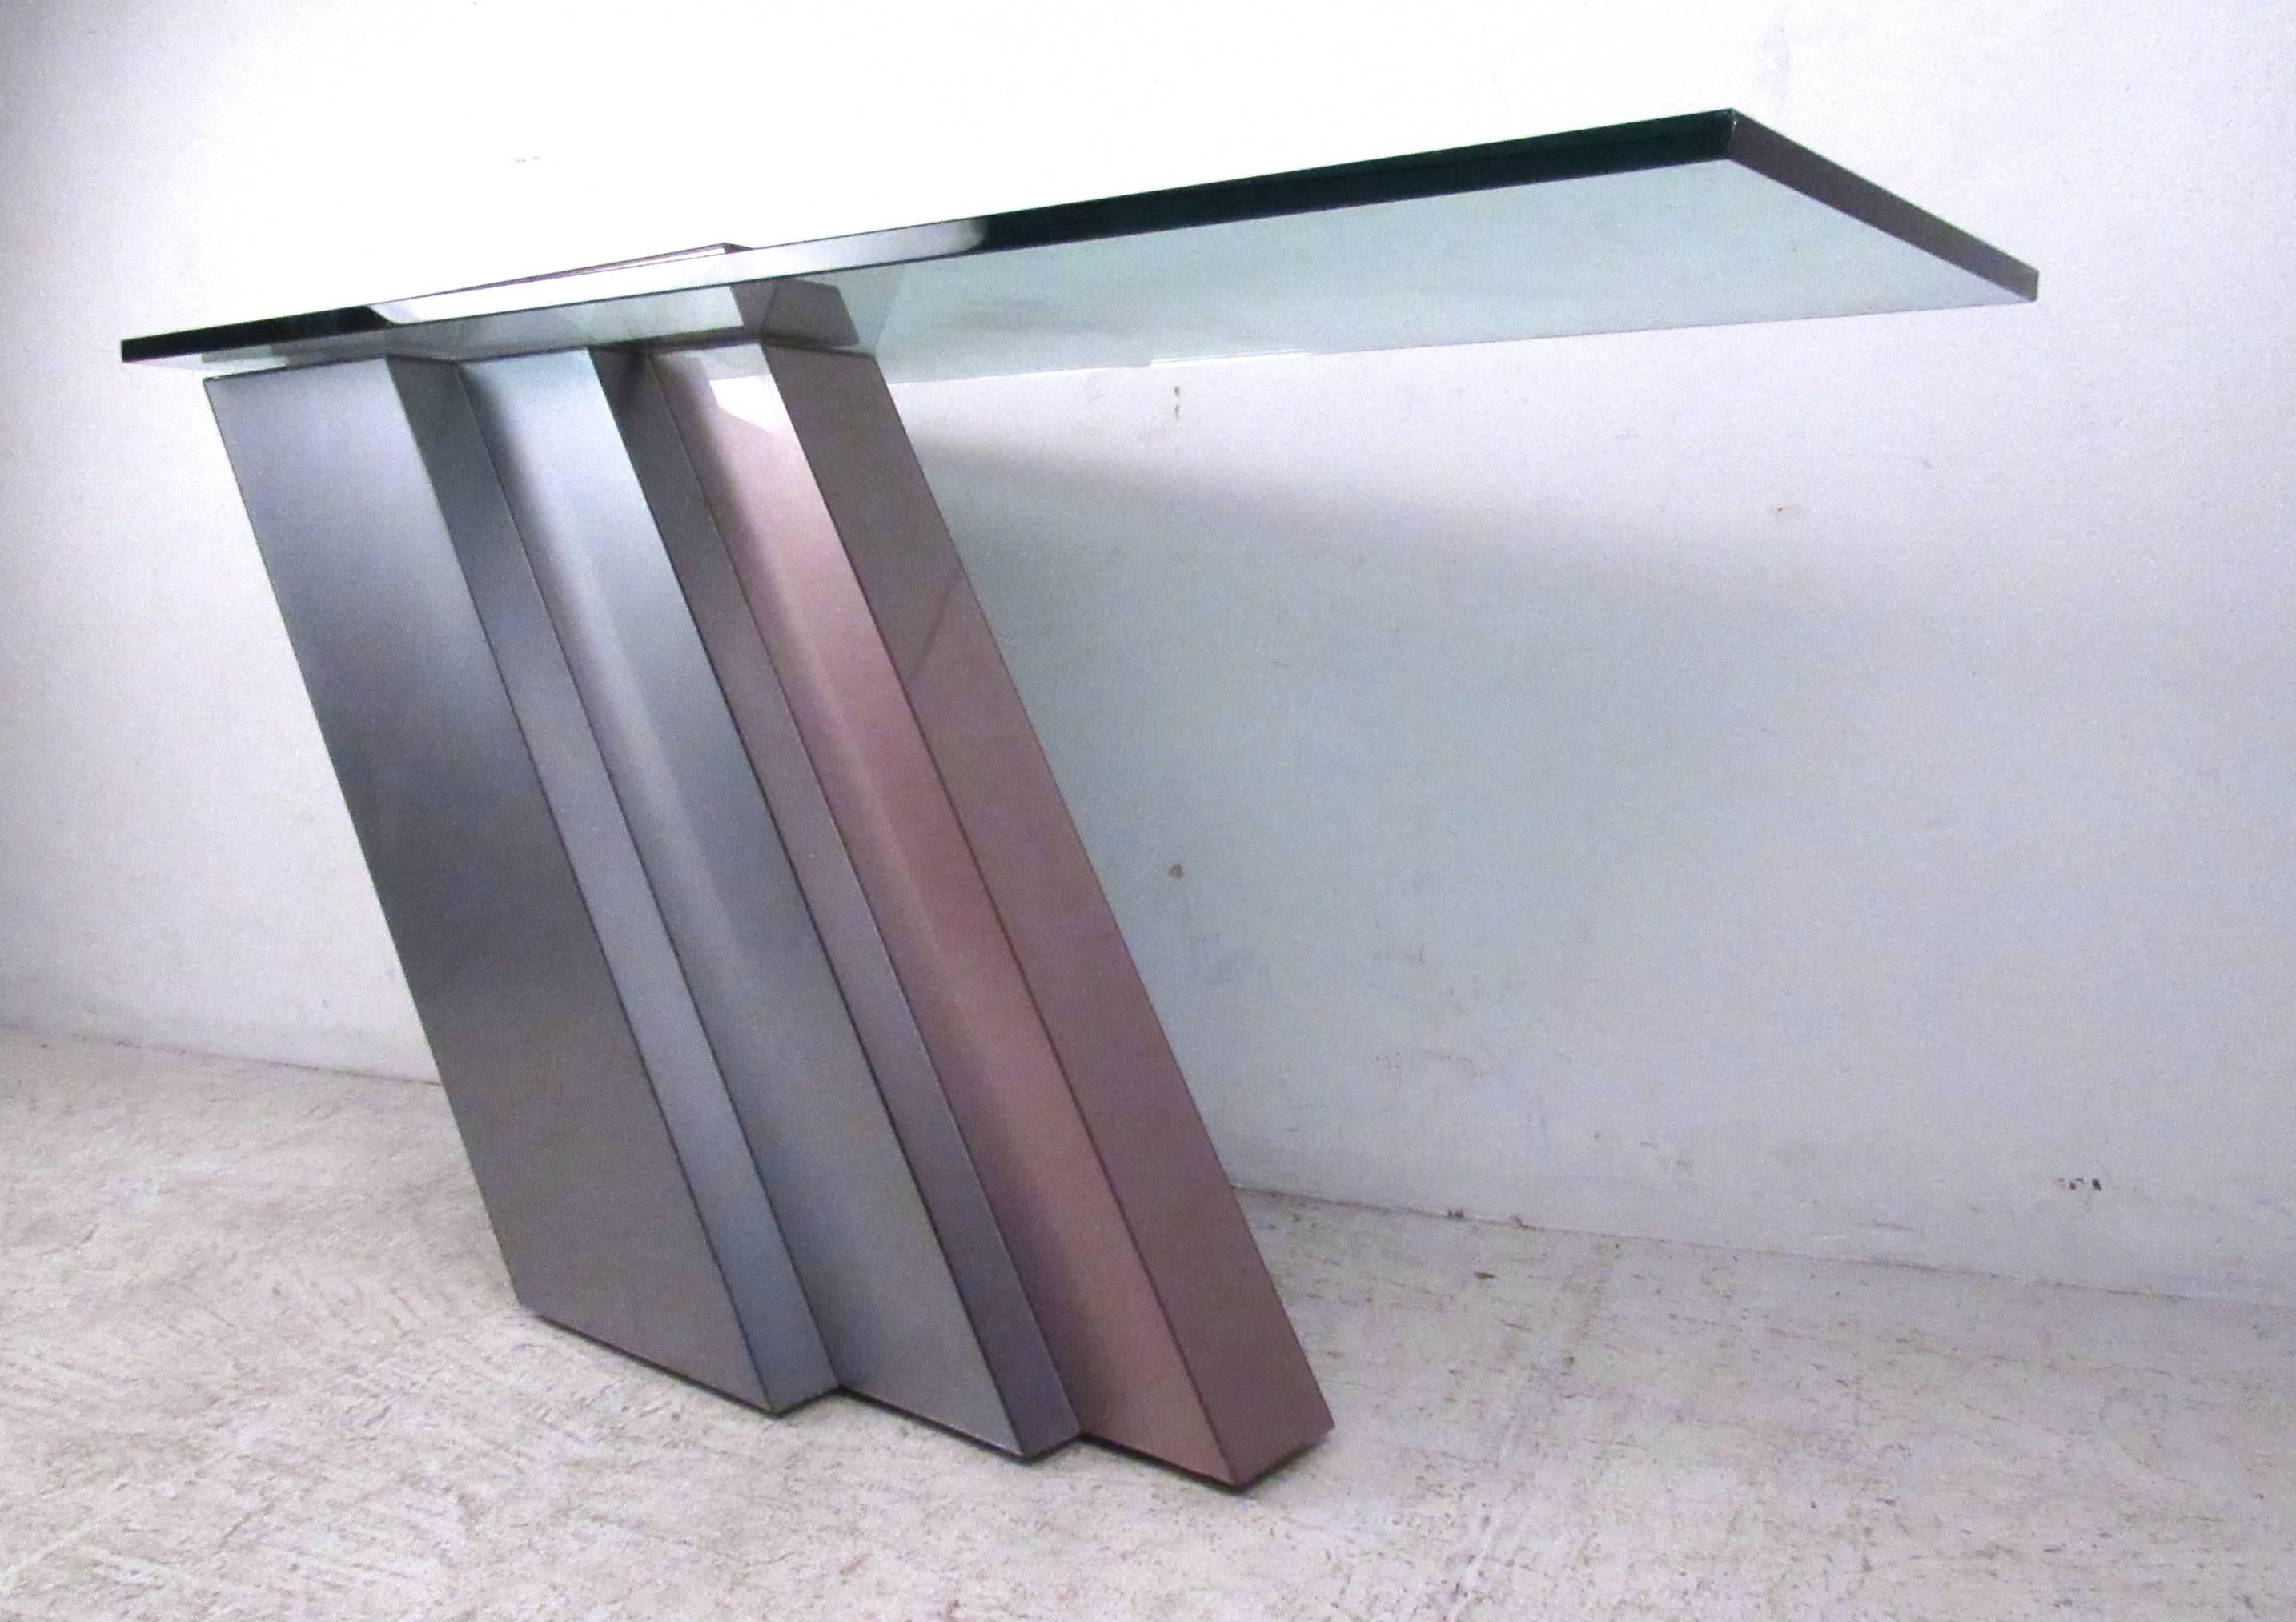 This vintage cantilever table features a sturdy weighted base that features unique lines and a thick glass top. Fantastic retro style for any hallway, entryway, or living room. Please confirm item location (NY or NJ).